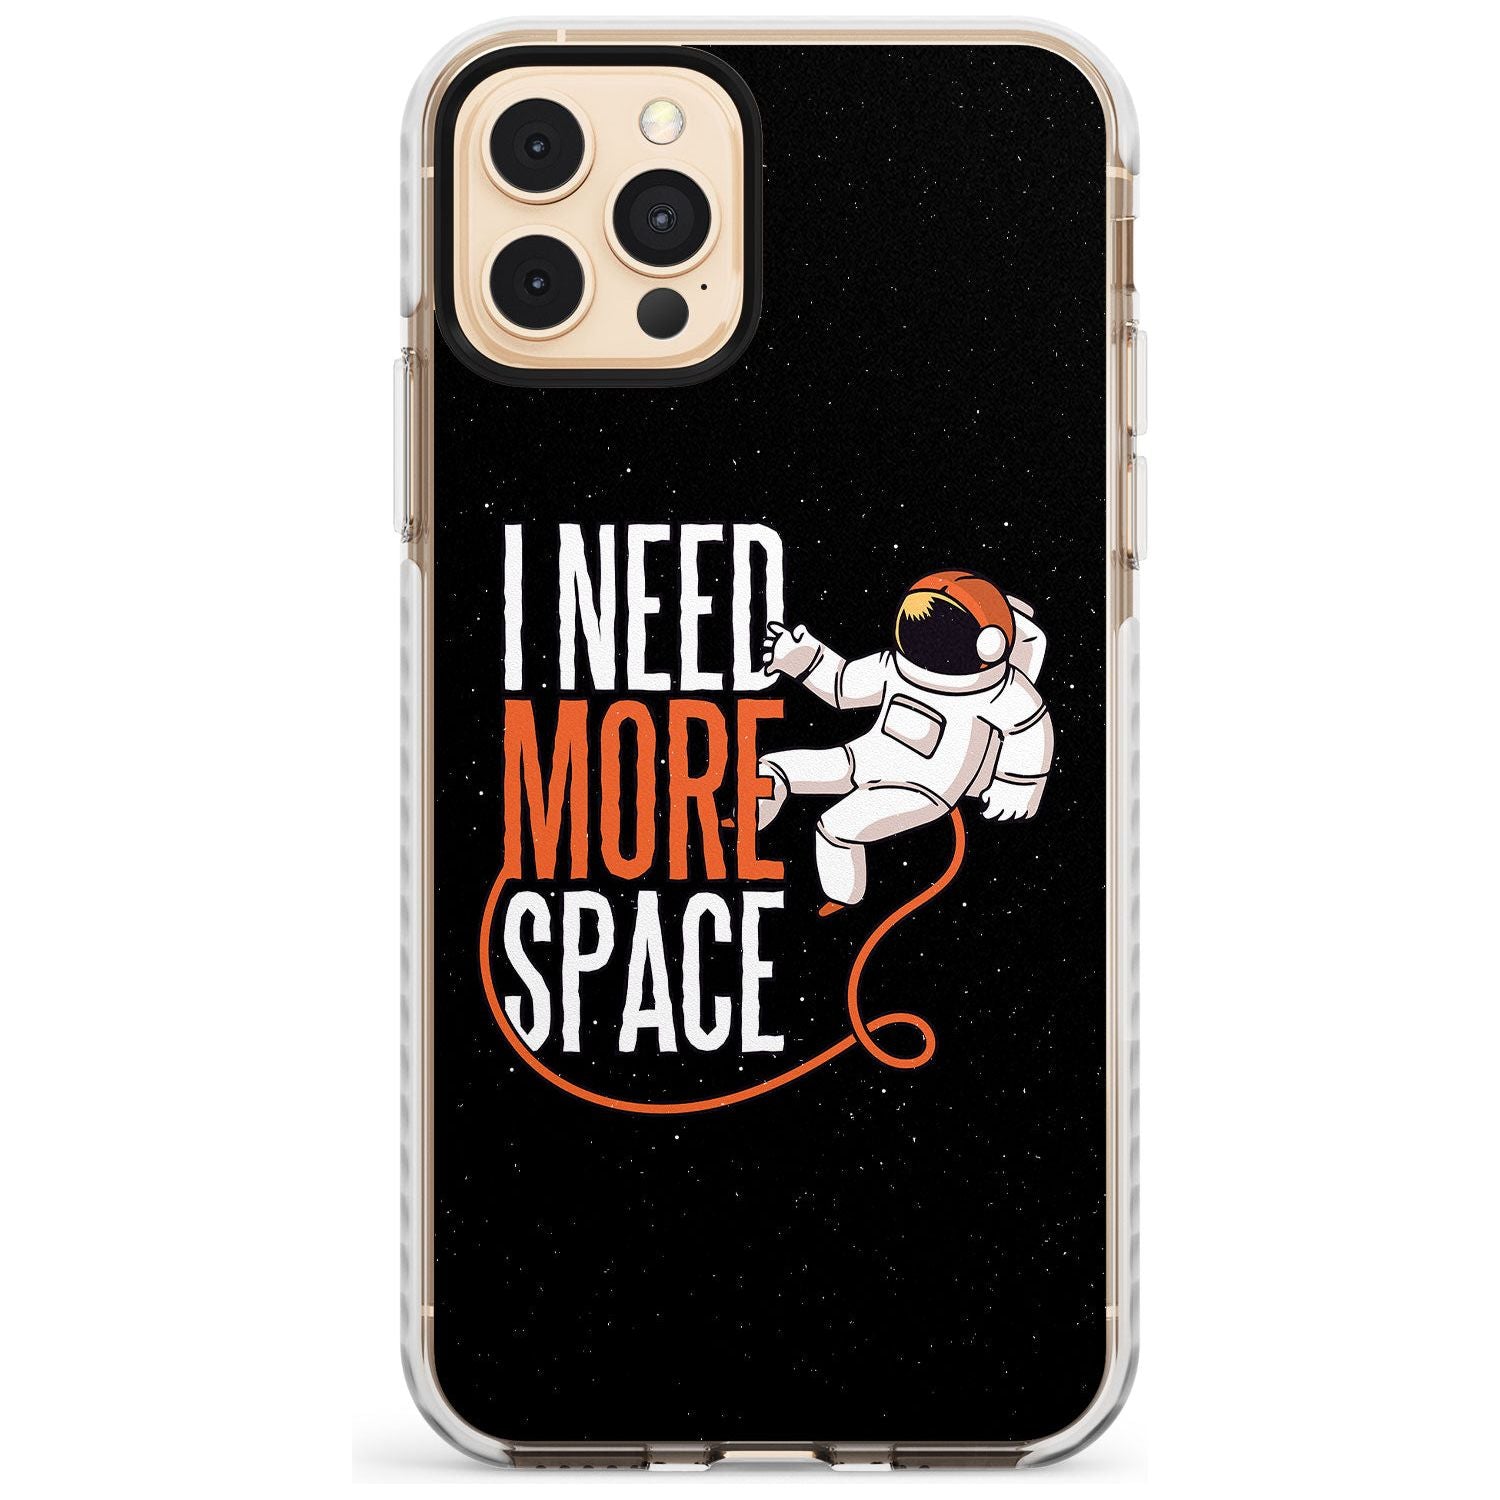 I Need More Space Slim TPU Phone Case for iPhone 11 Pro Max